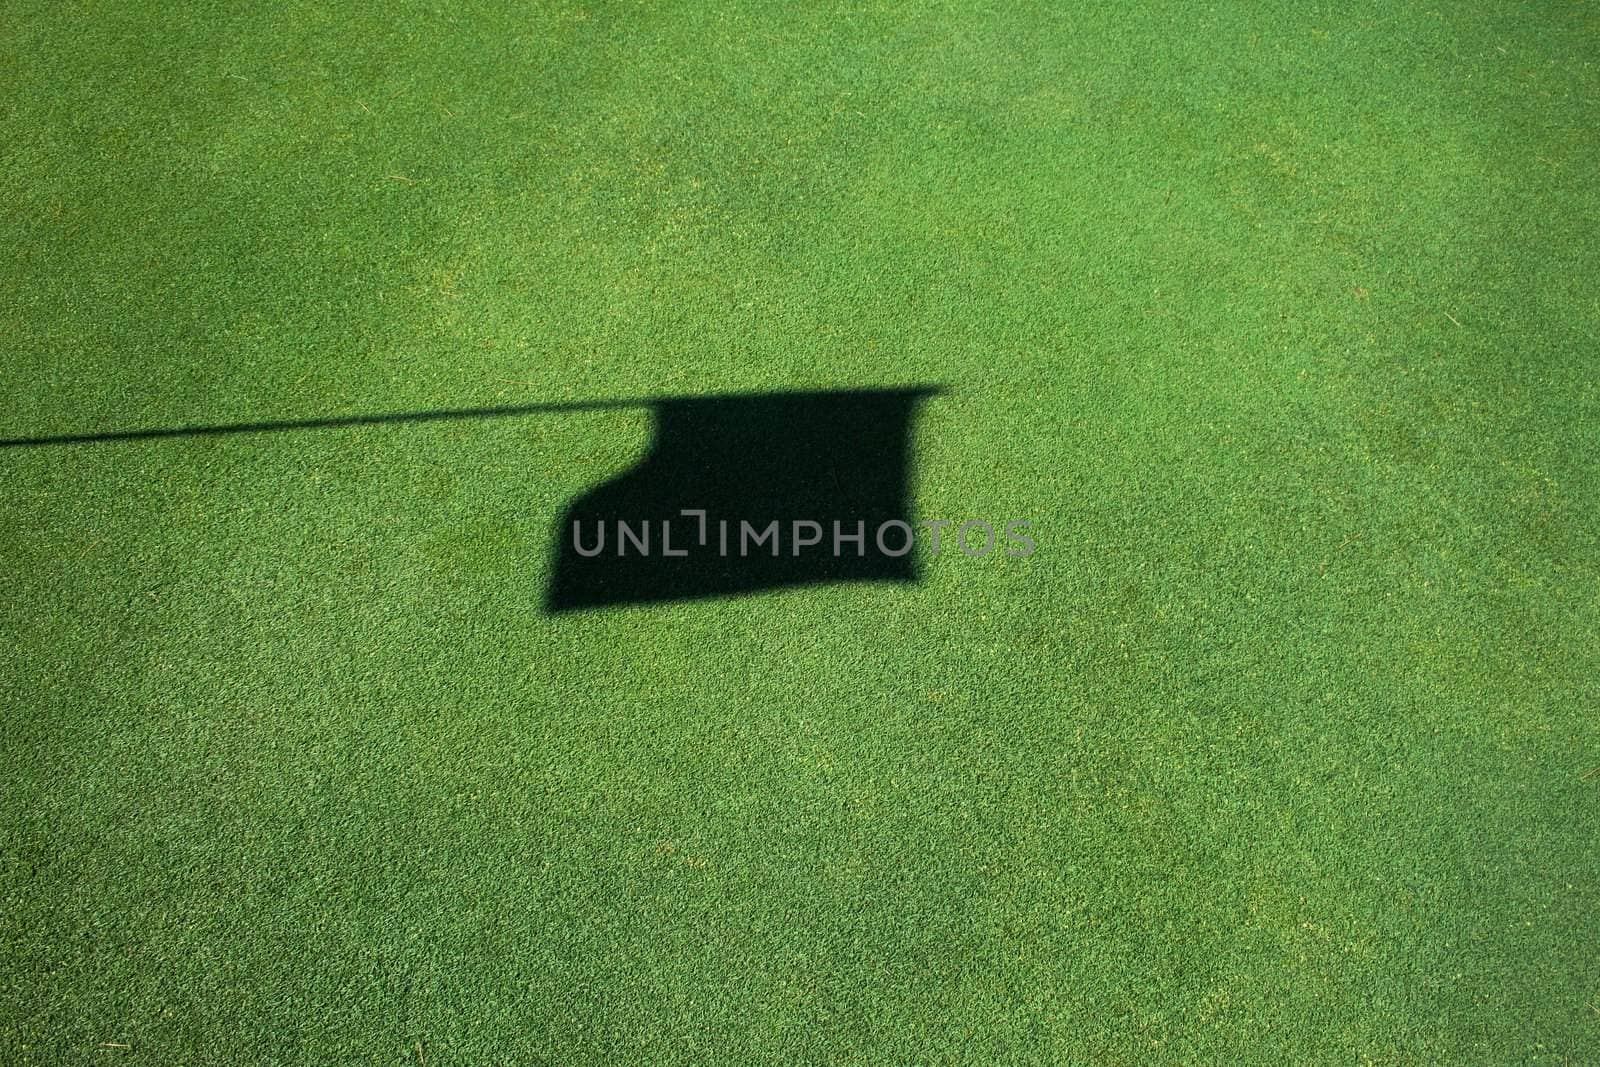 Shadow of flag on top of pin on a golf green